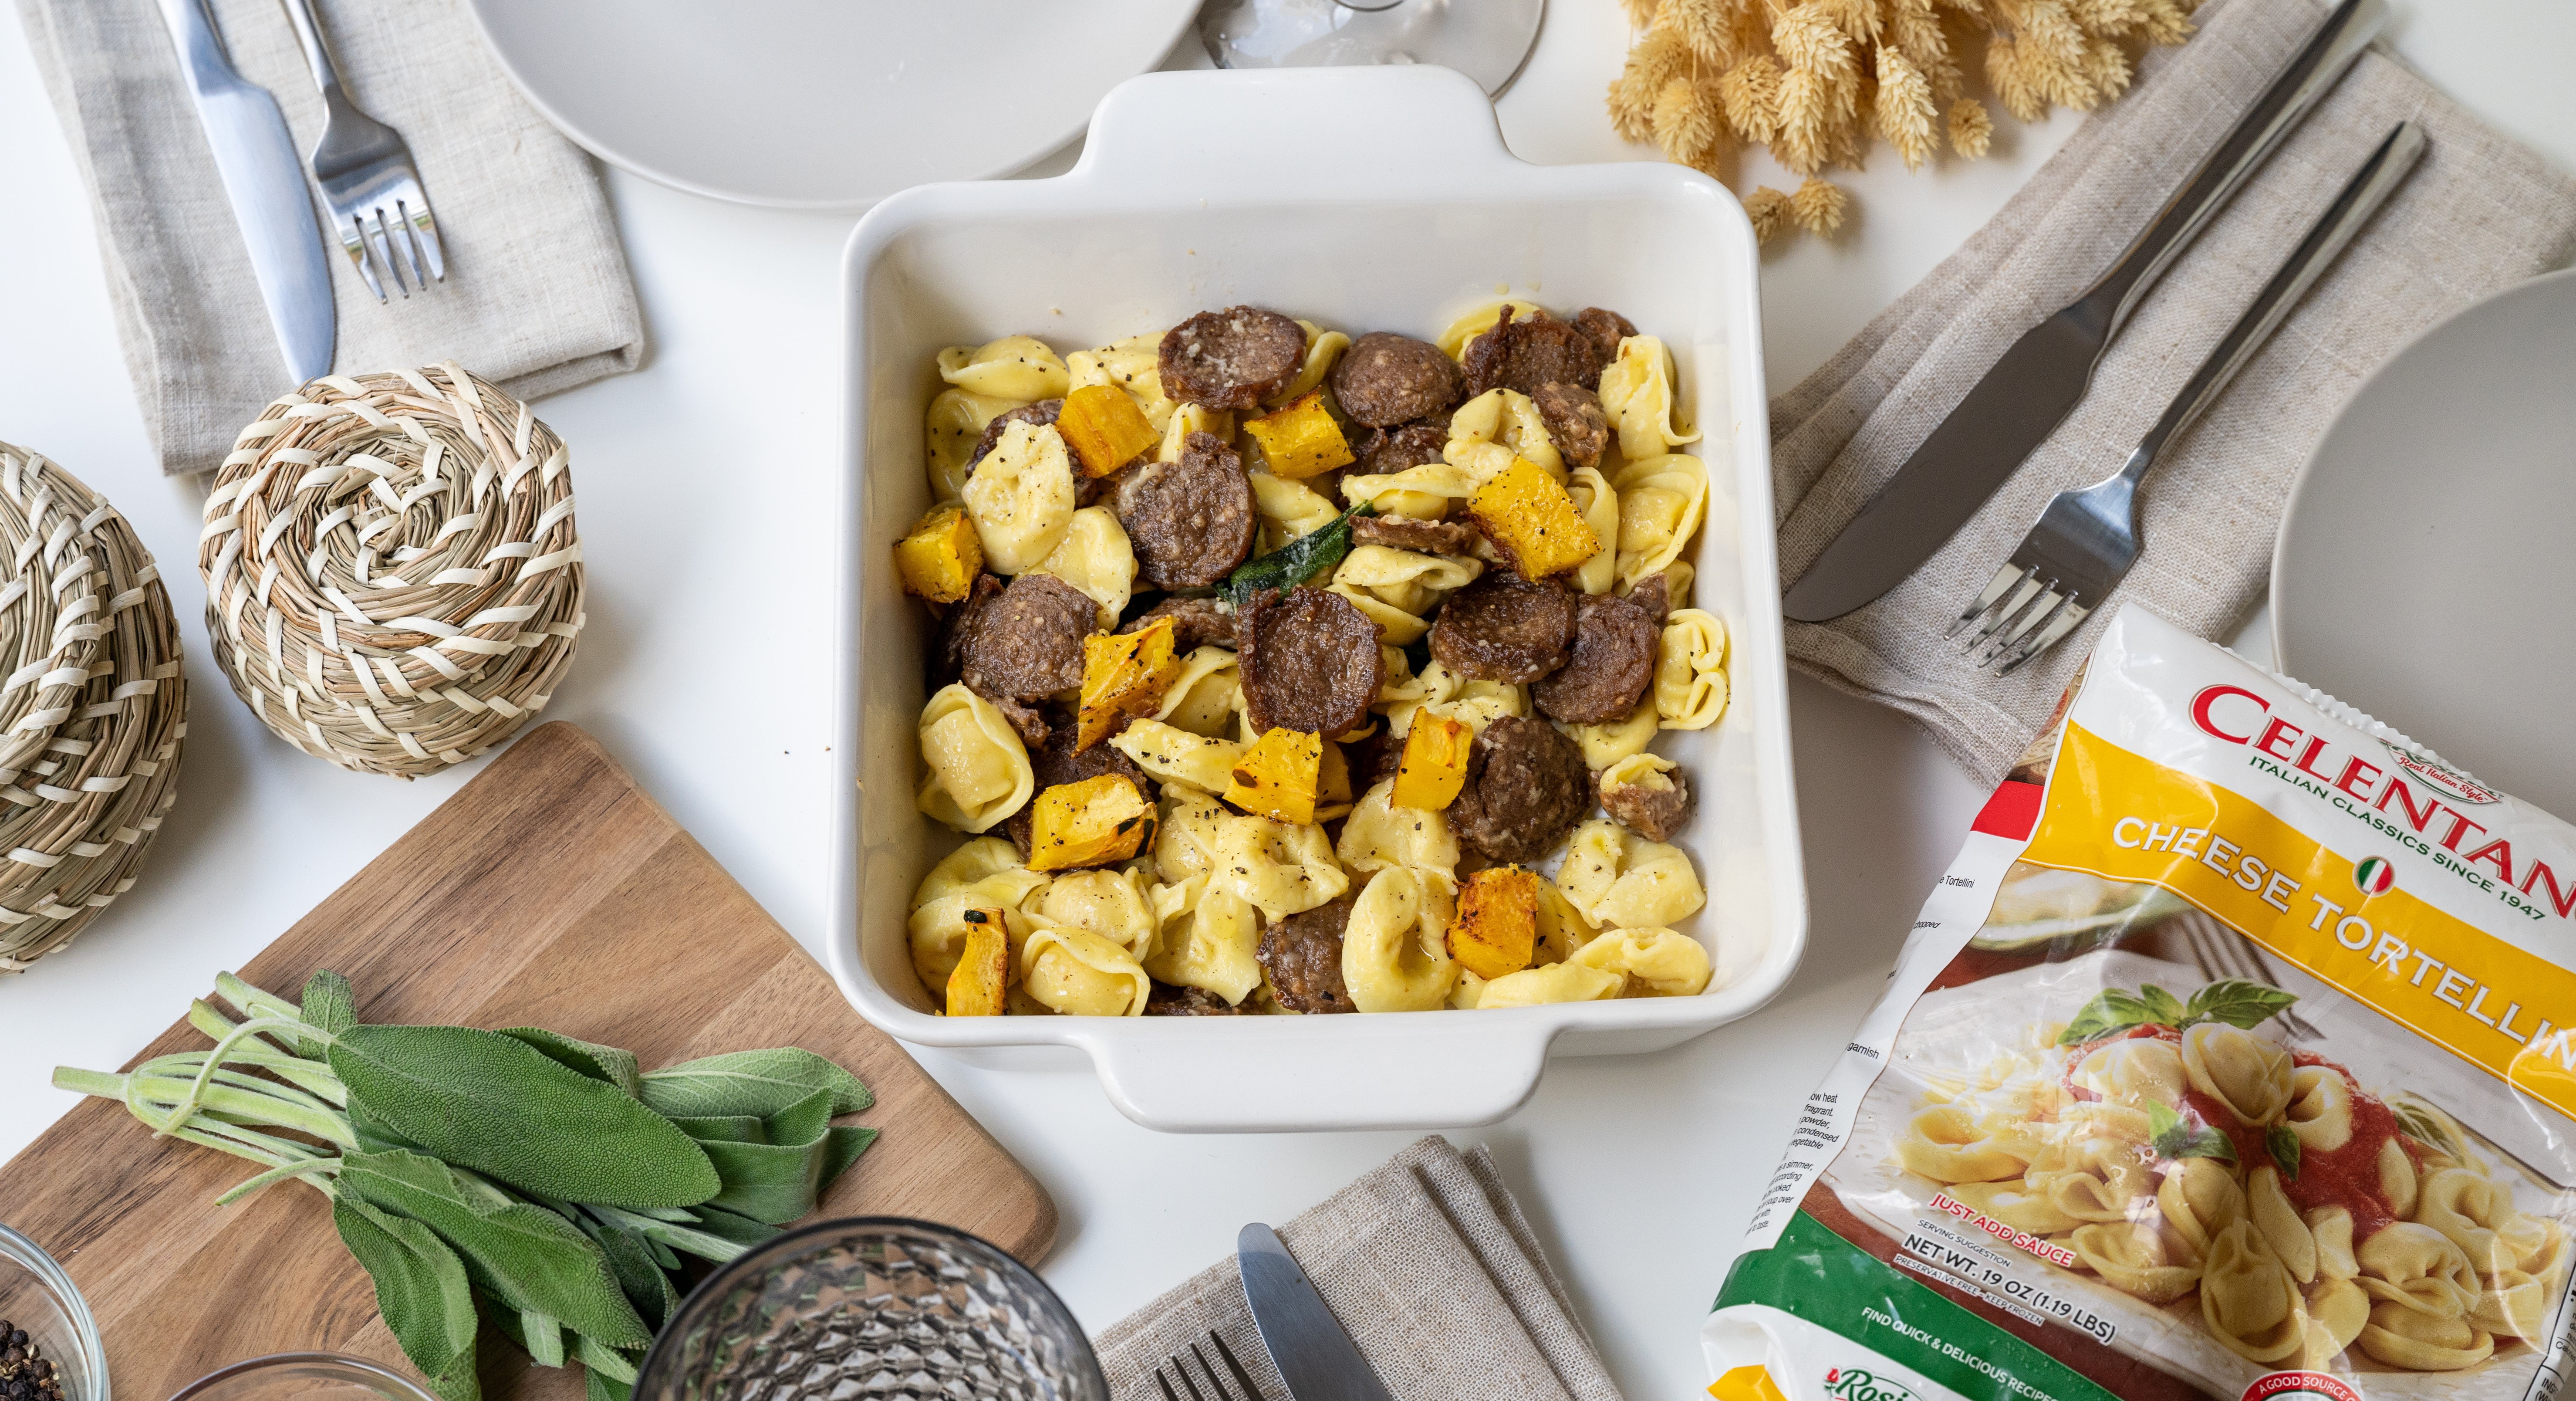 Cheese Tortellini with Acorn Squash, Angus Meatballs & Brown Butter Sauce